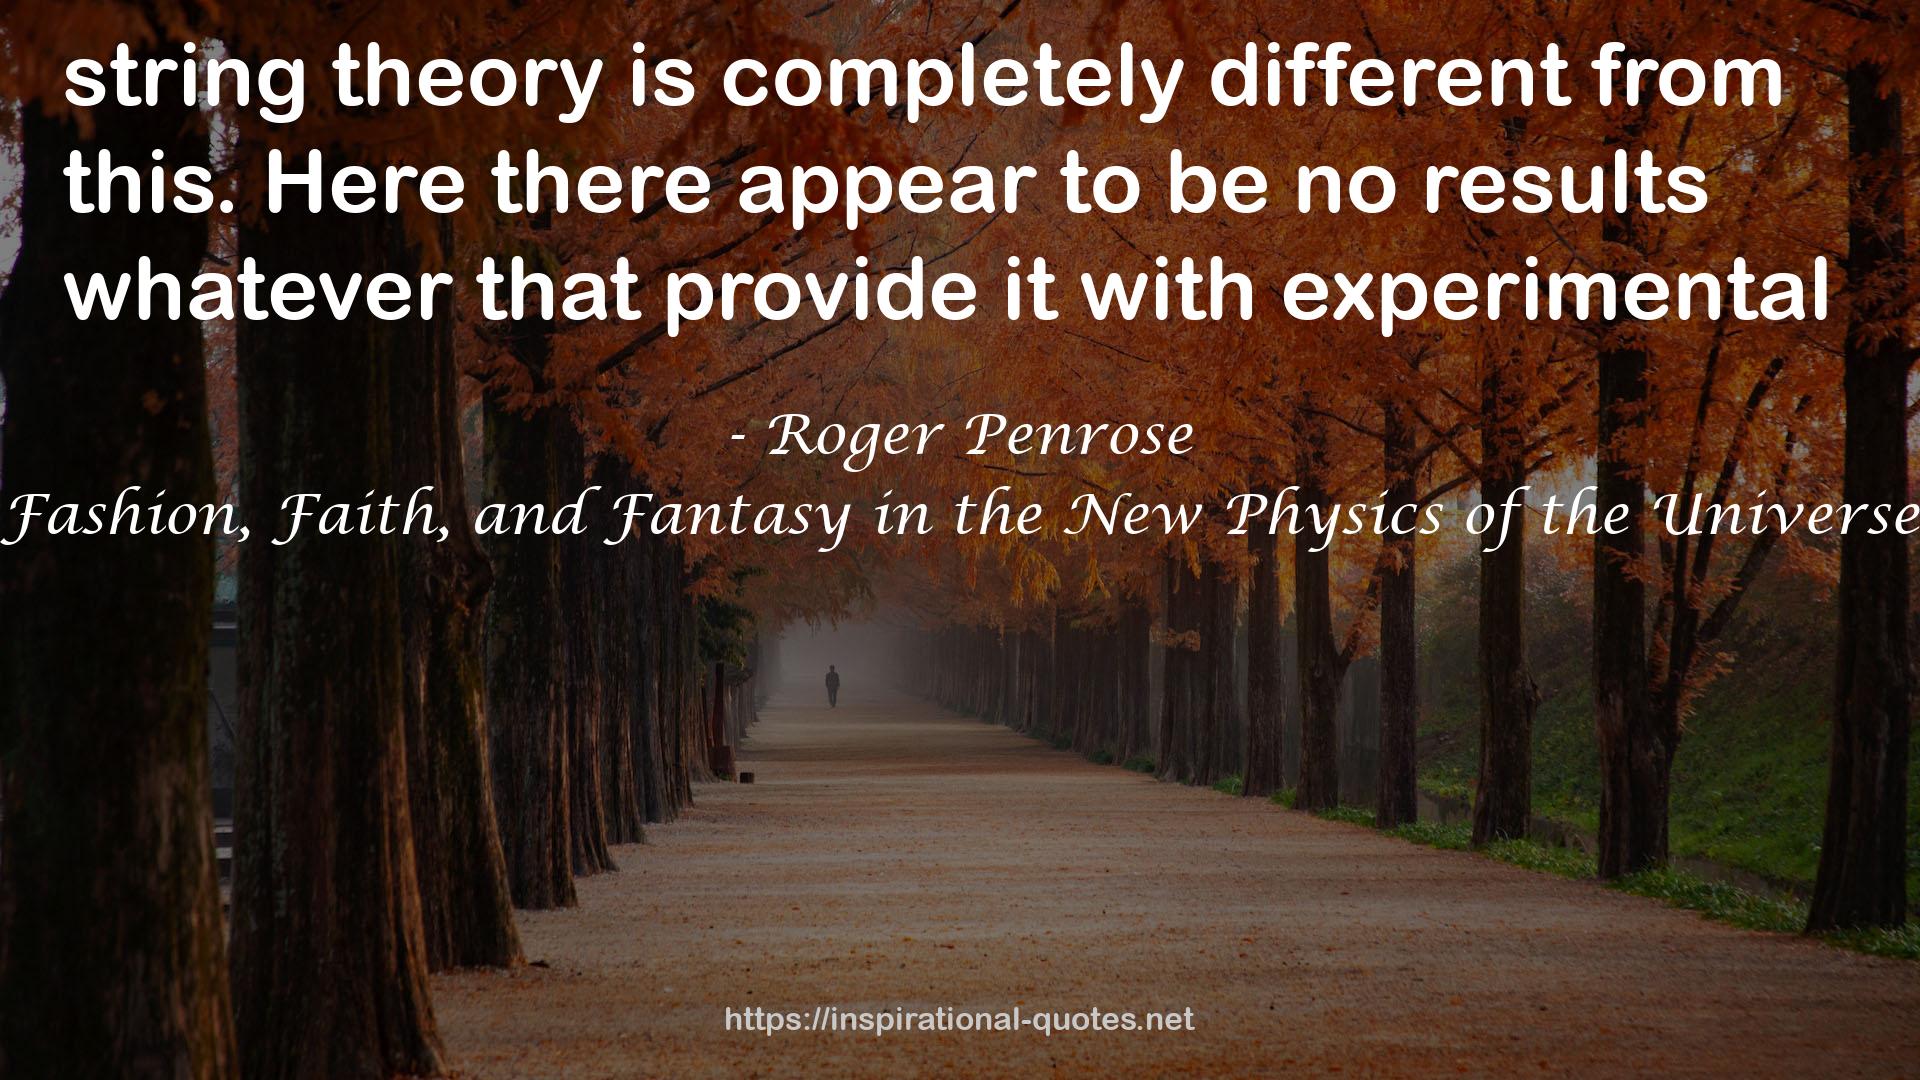 Fashion, Faith, and Fantasy in the New Physics of the Universe QUOTES